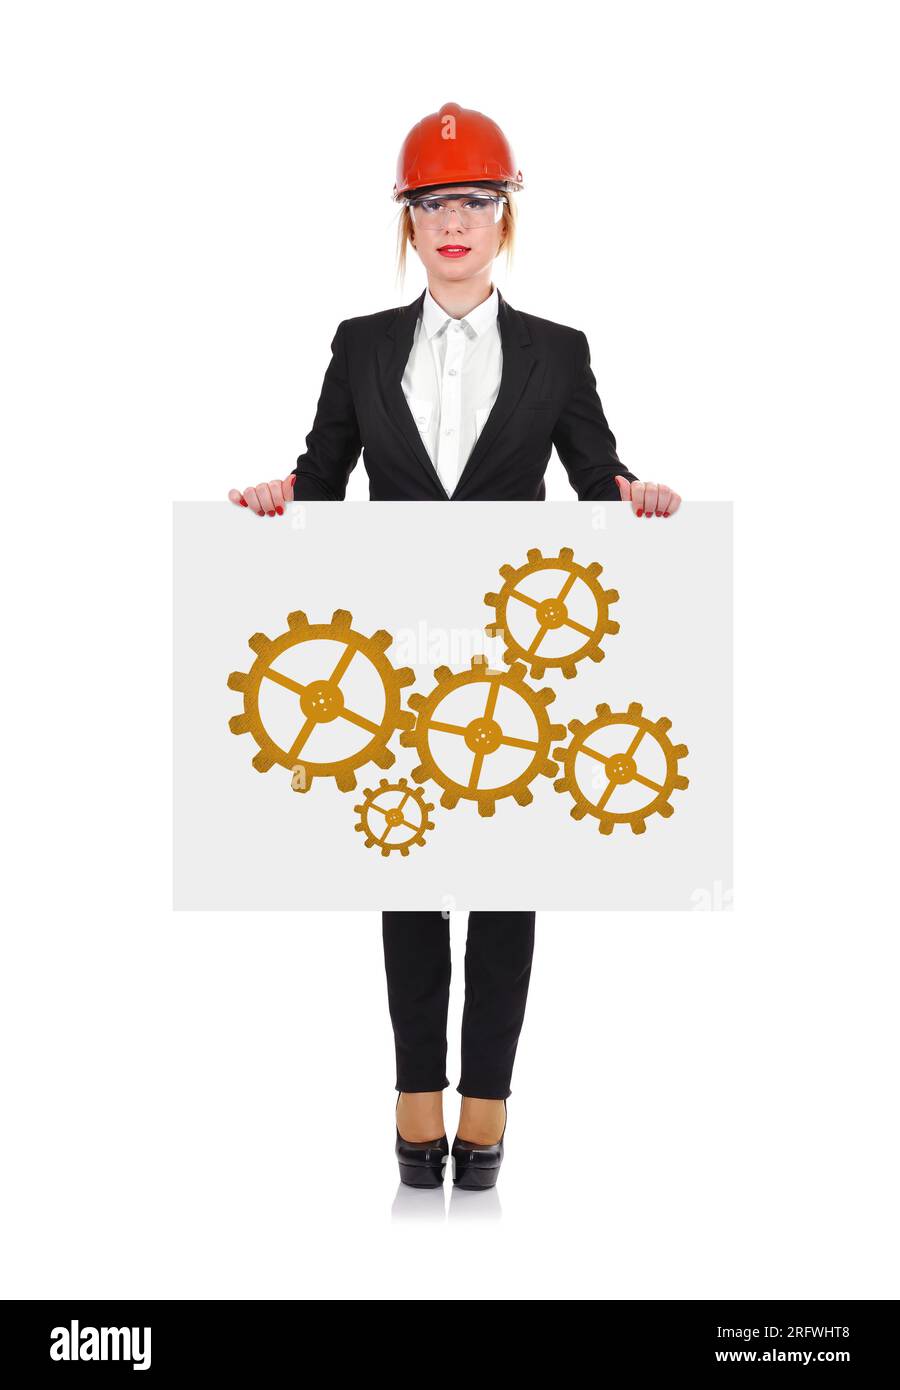 Engineer woman holding paper with cogs and wheels Stock Photo